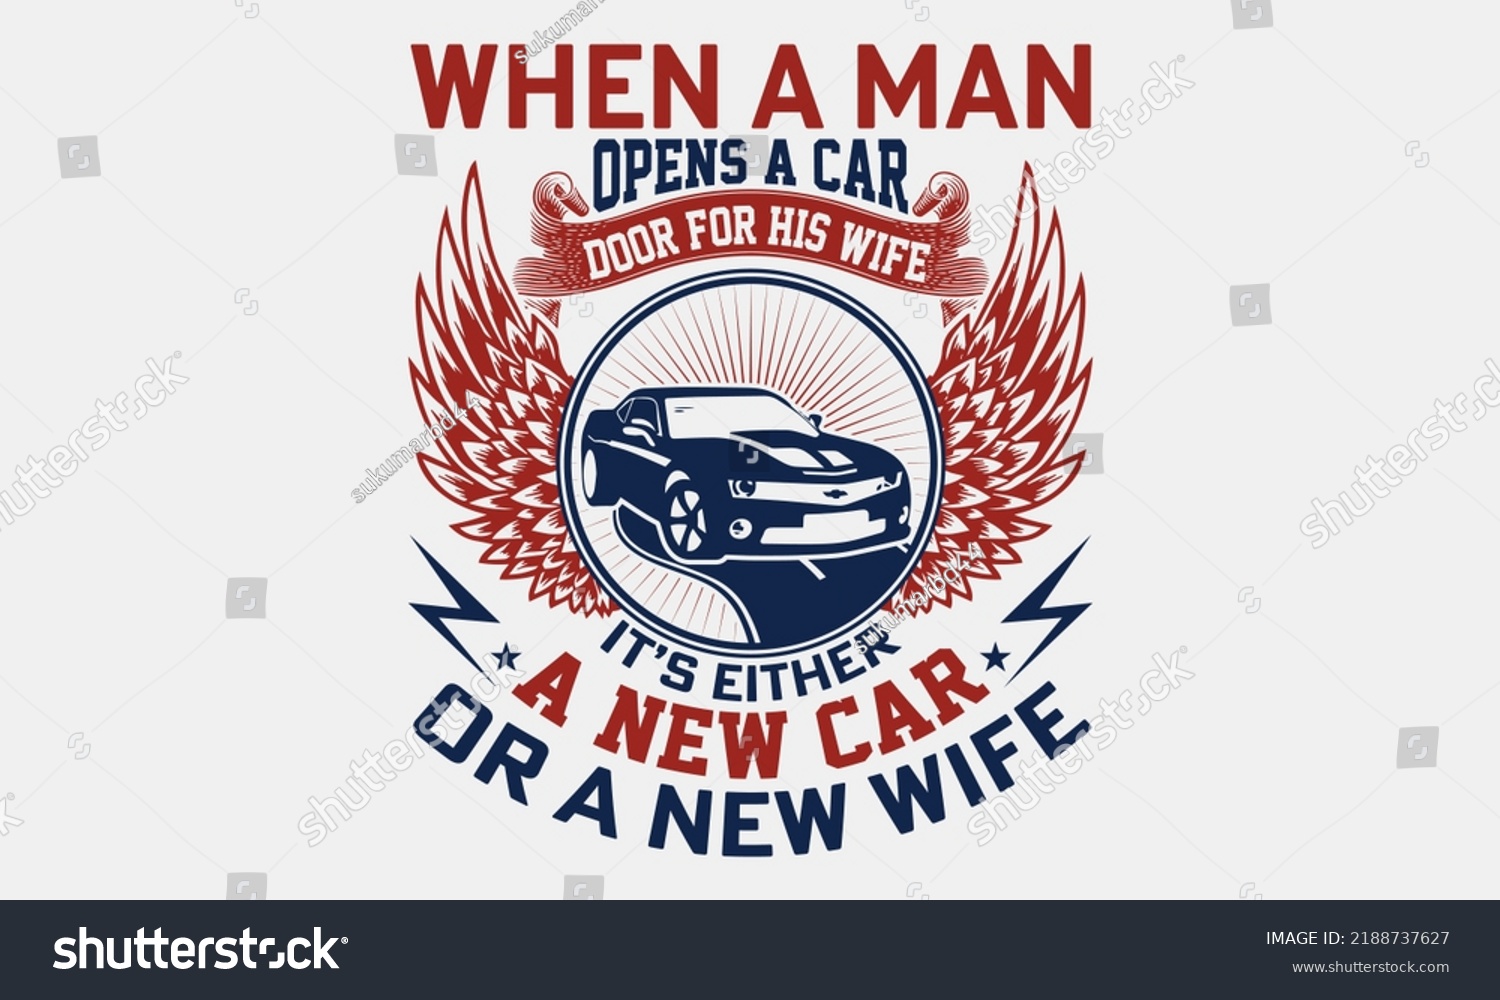 SVG of When A Man Opens A Car Door For His Wife It’s Either A New Car Or A New Wife - Funny t-shirt design, SVG Files for Cutting, Handmade calligraphy vector illustration, Hand written vector sign, EPS svg